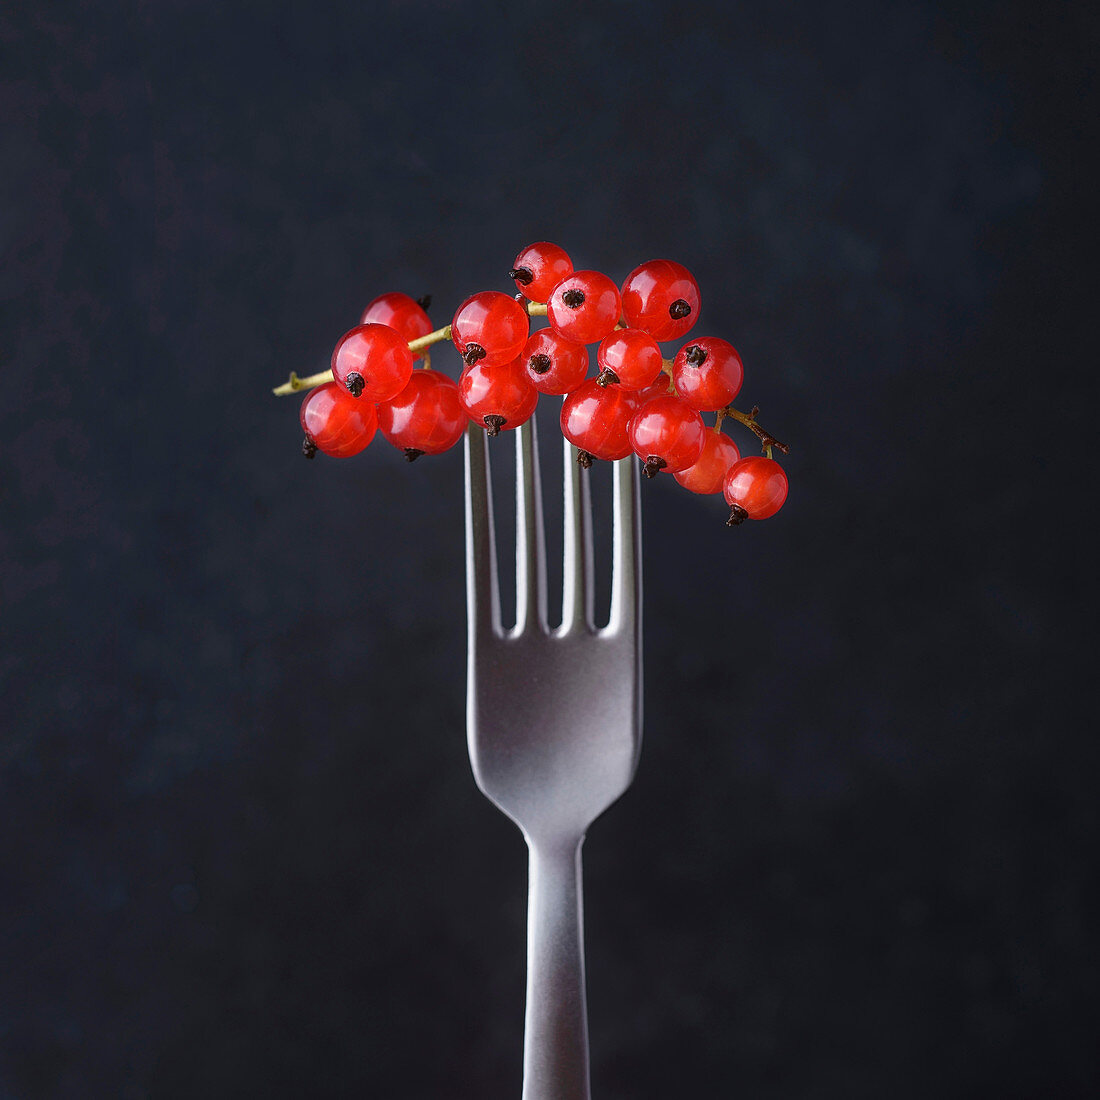 Currants on a fork